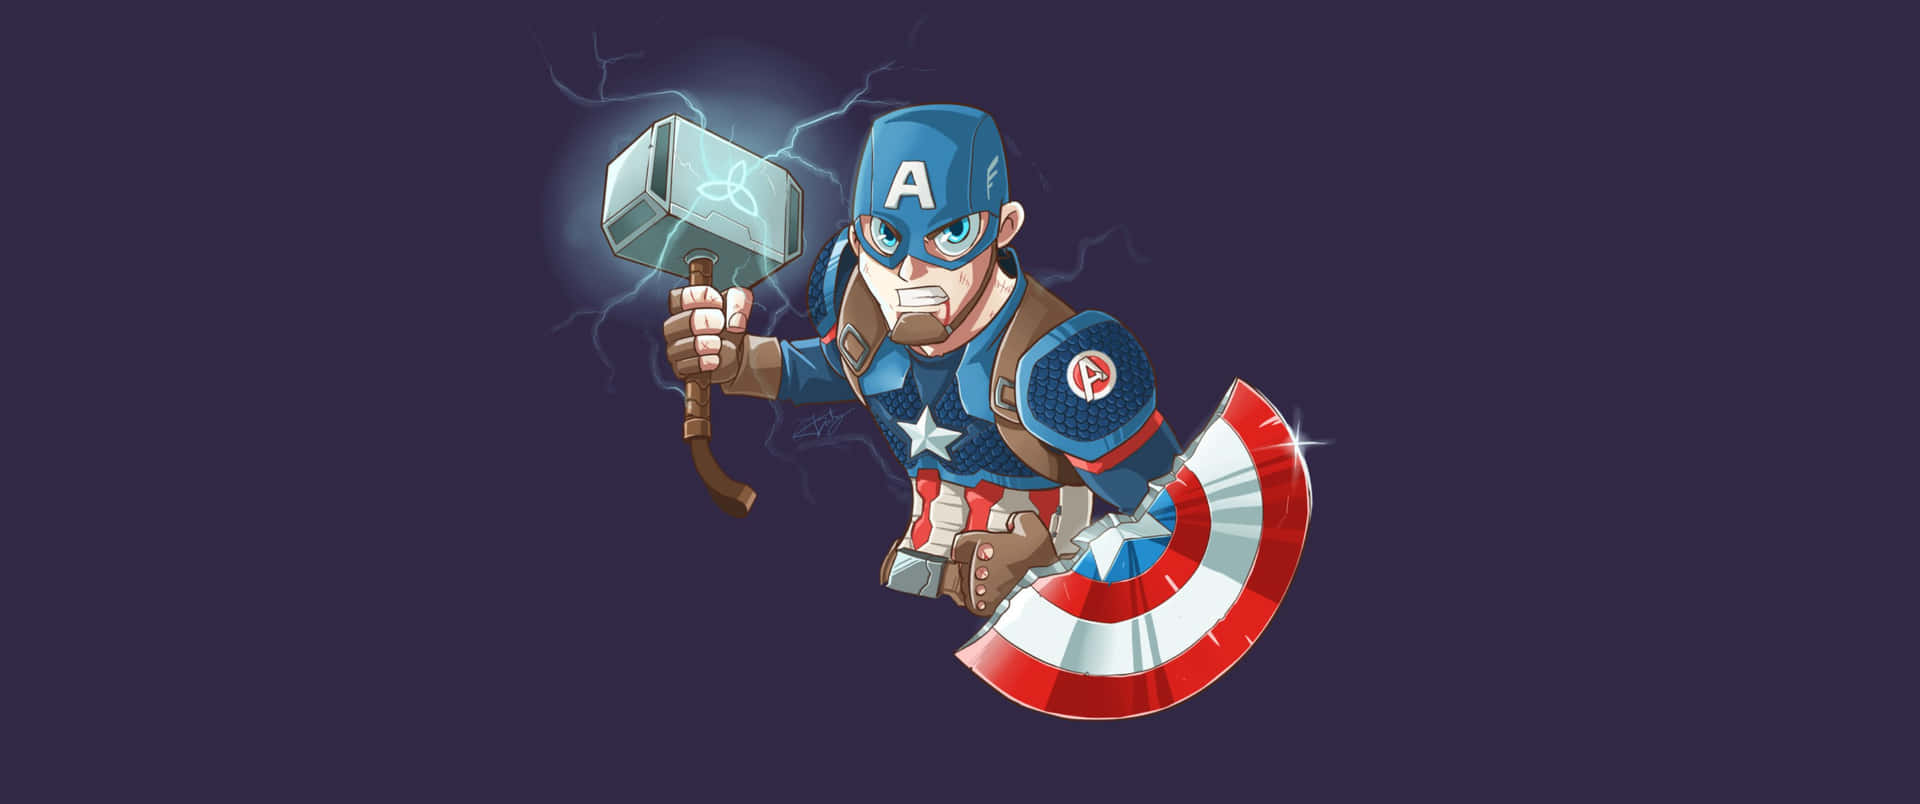 Marvel's Captain America in his classic outfit